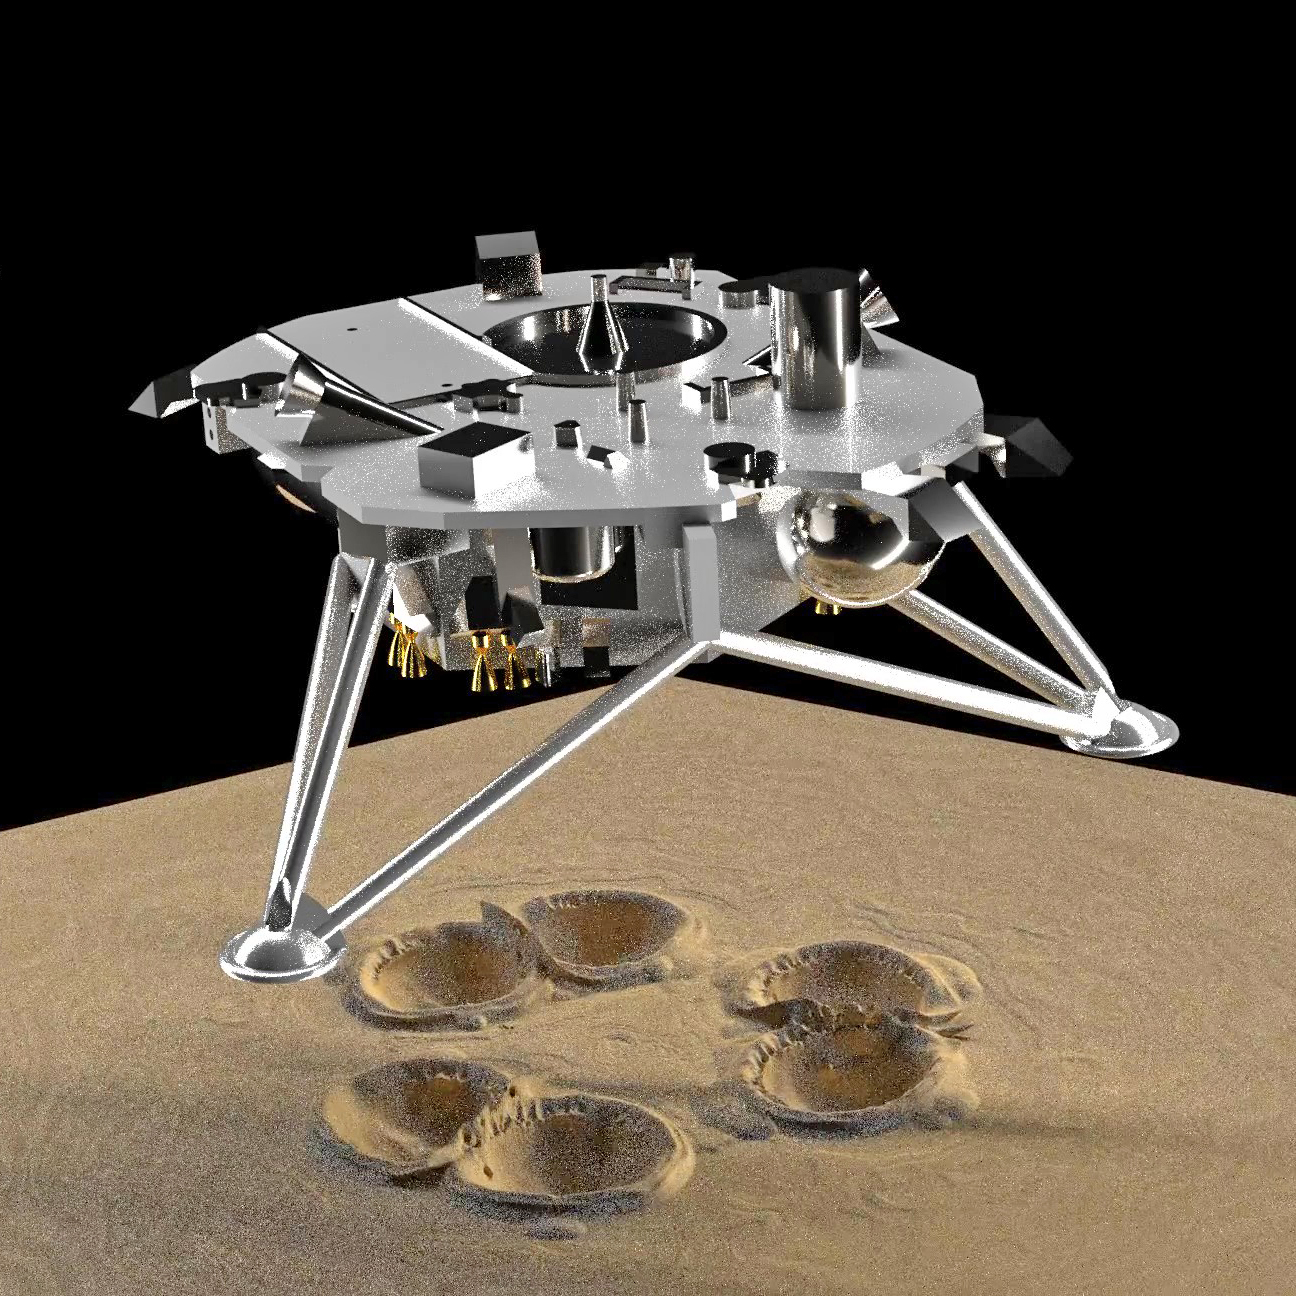 Computational simulation of craters resulting from InSight Mars lander engines